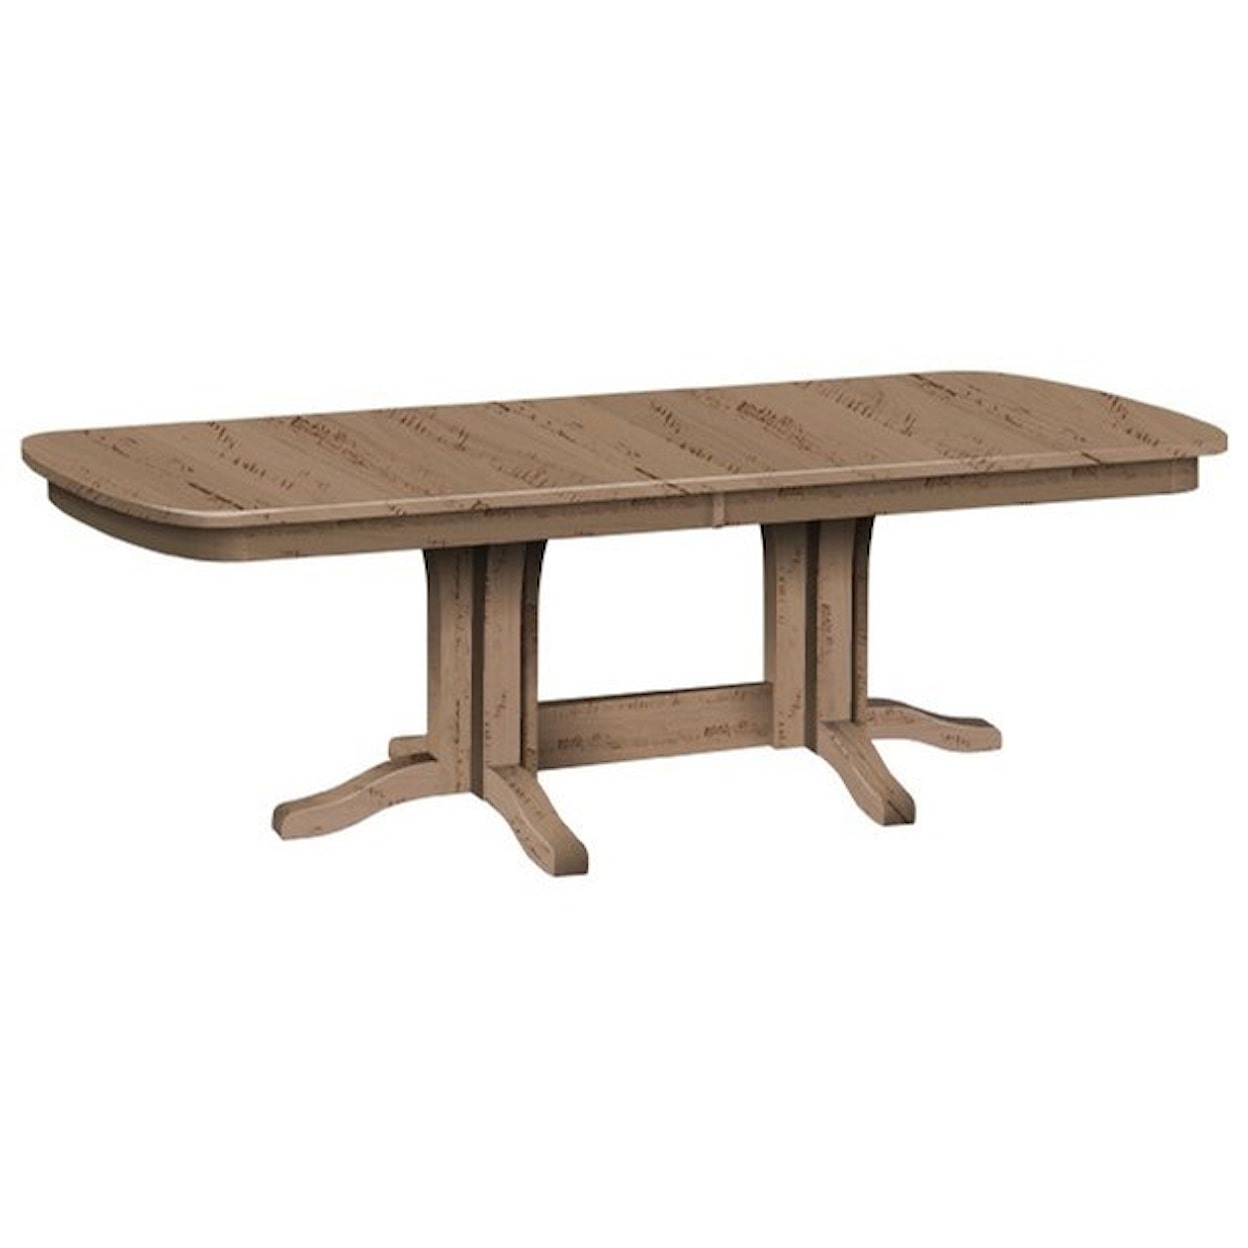 Daniels Amish Millsdale Customizable Solid Wood Millsdale Table